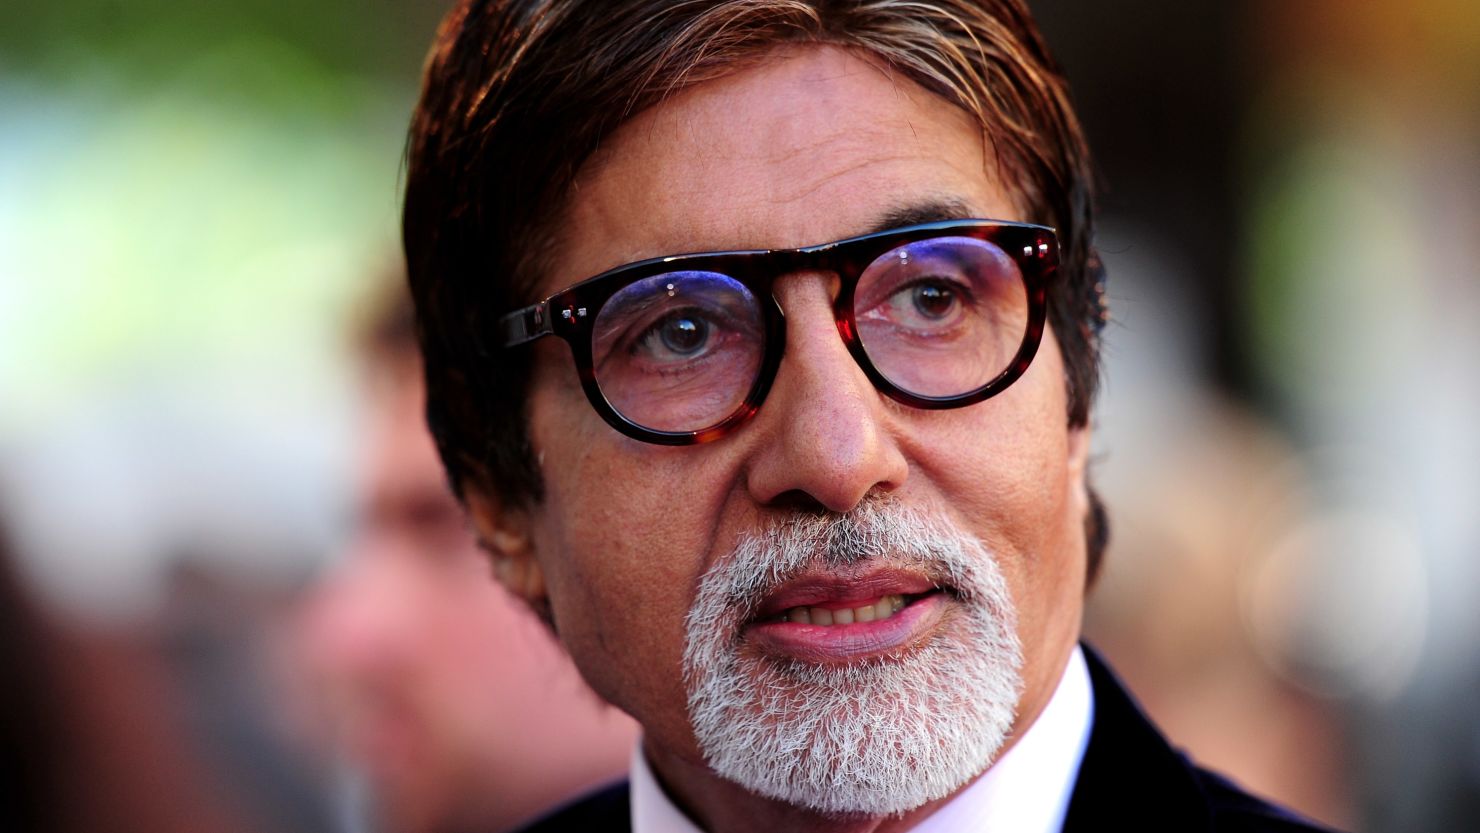 Amitabh Bachchan  arrives at the World Premiere of Raavan at the BFI Southbank on June 16, 2010 in London, England.